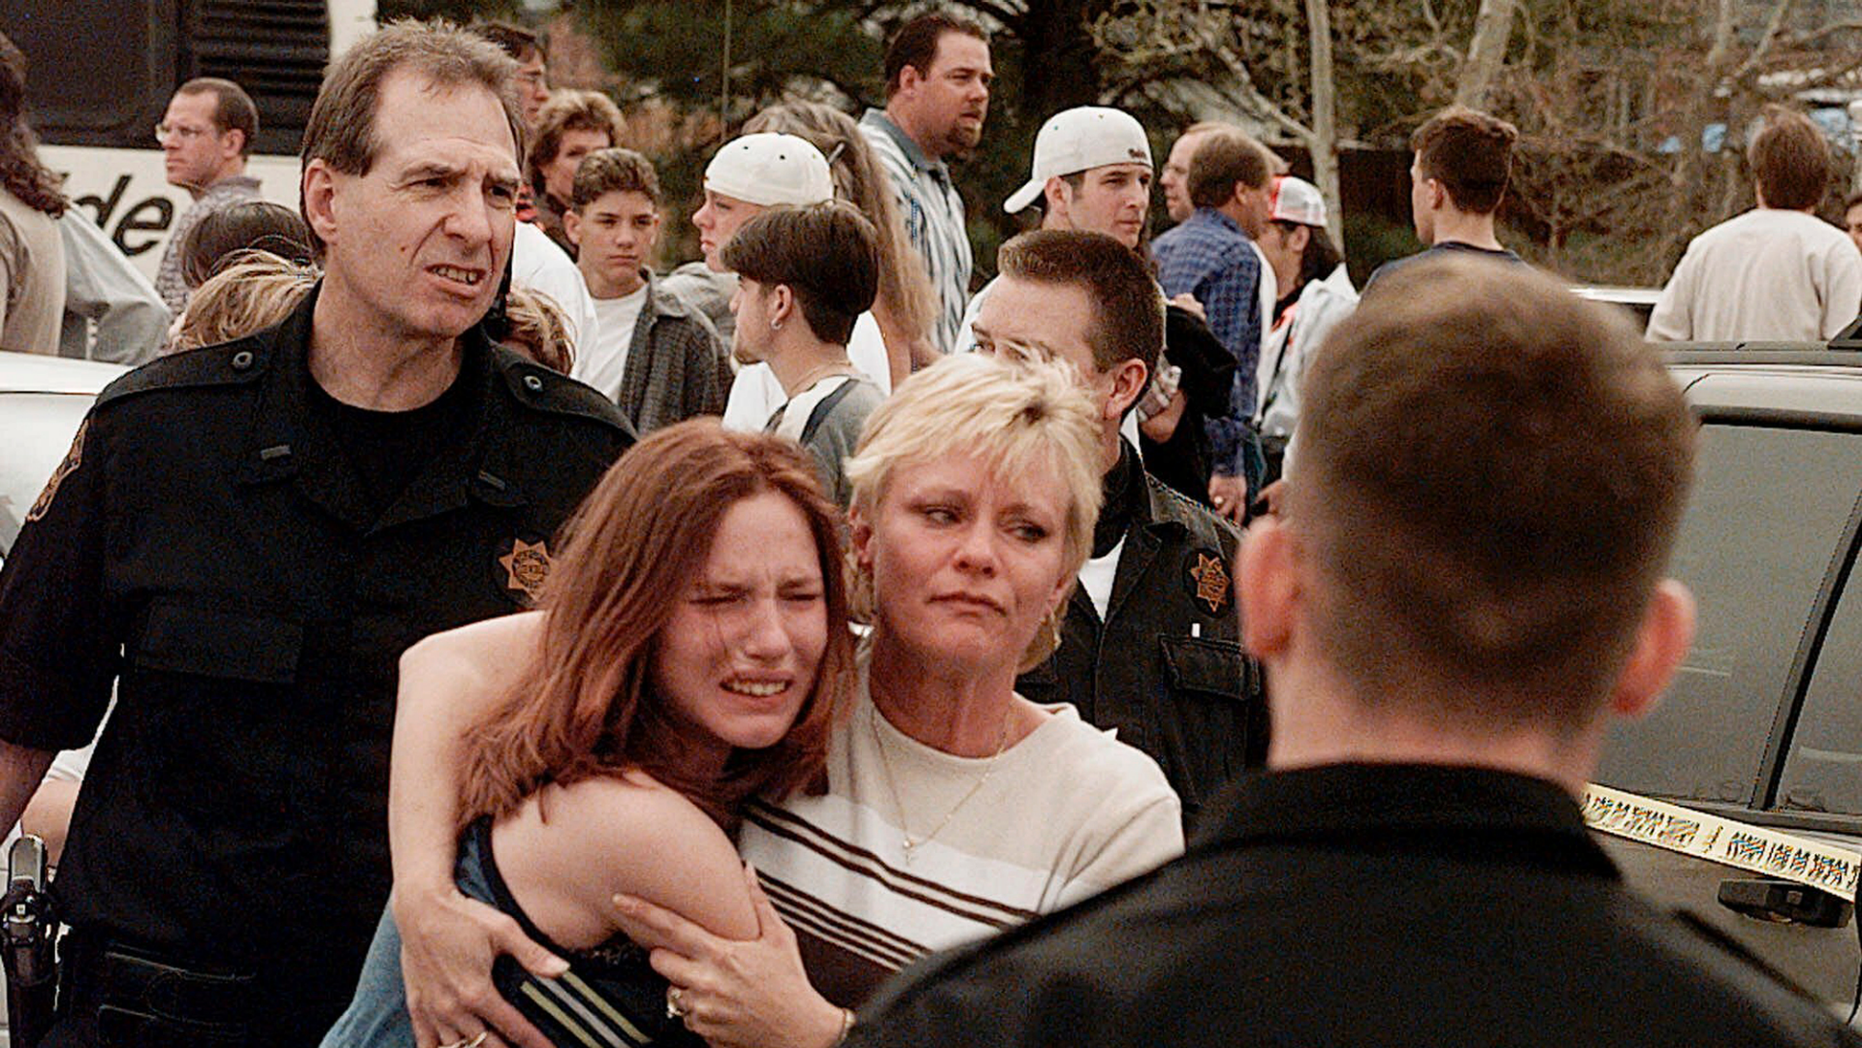 FEATURE - On April 20, 1999, a woman kissed her daughter after their meeting after the shooting at Columbine High School in Littleton, Colorado. side. Images of the scene showed terrified students fleeing from school, SWAT officers waiting to enter and a wounded boy trying to escape through a window. (AP Photo / Ed Andrieski, File)